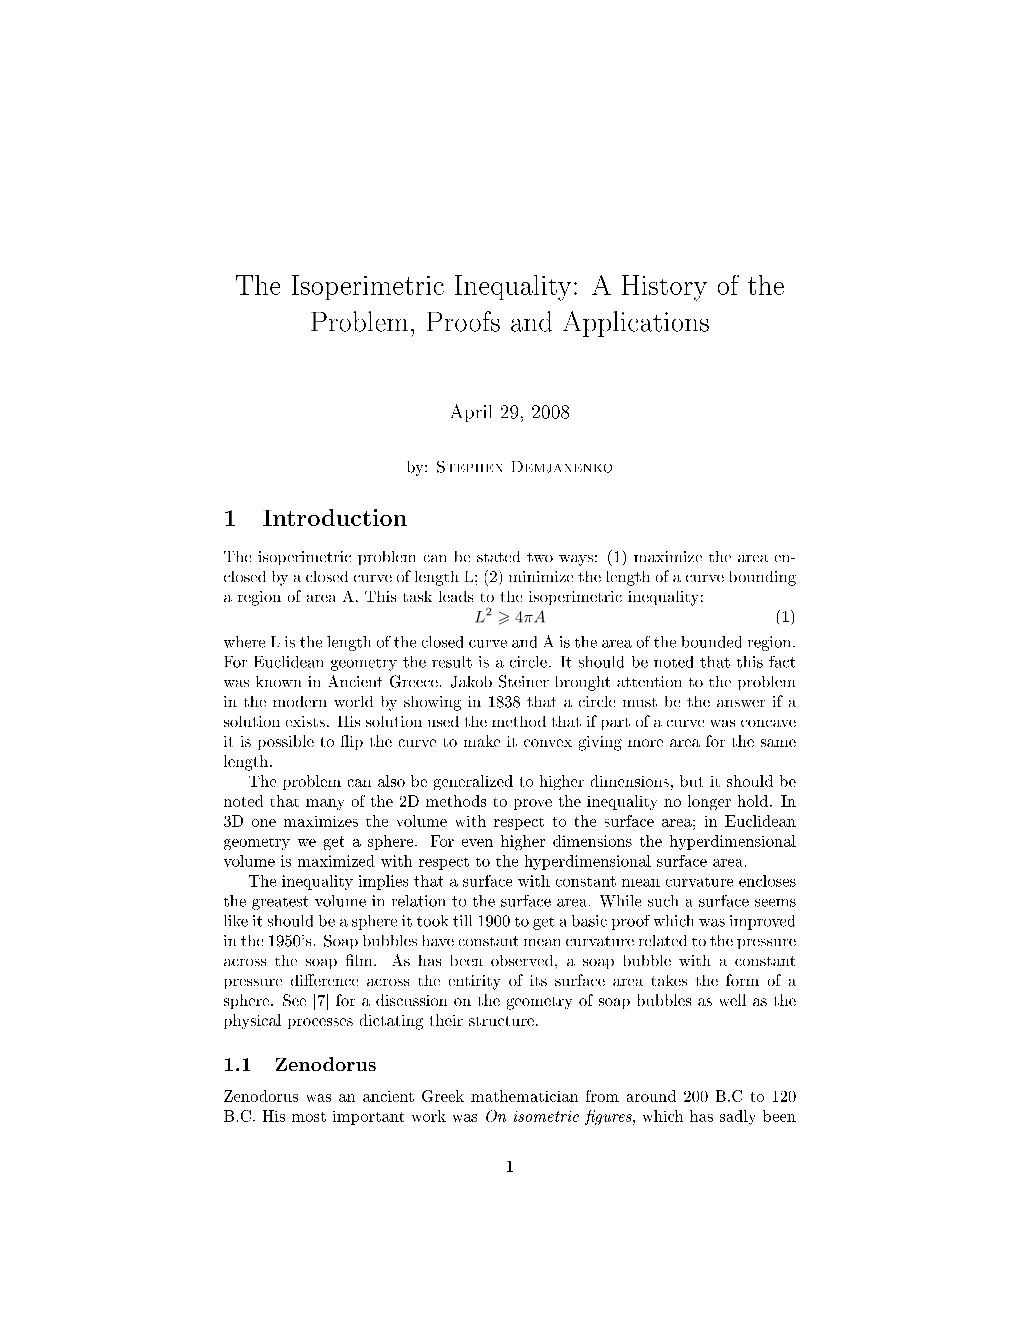 The Isoperimetric Inequality: a History of the Problem, Proofs and Applications